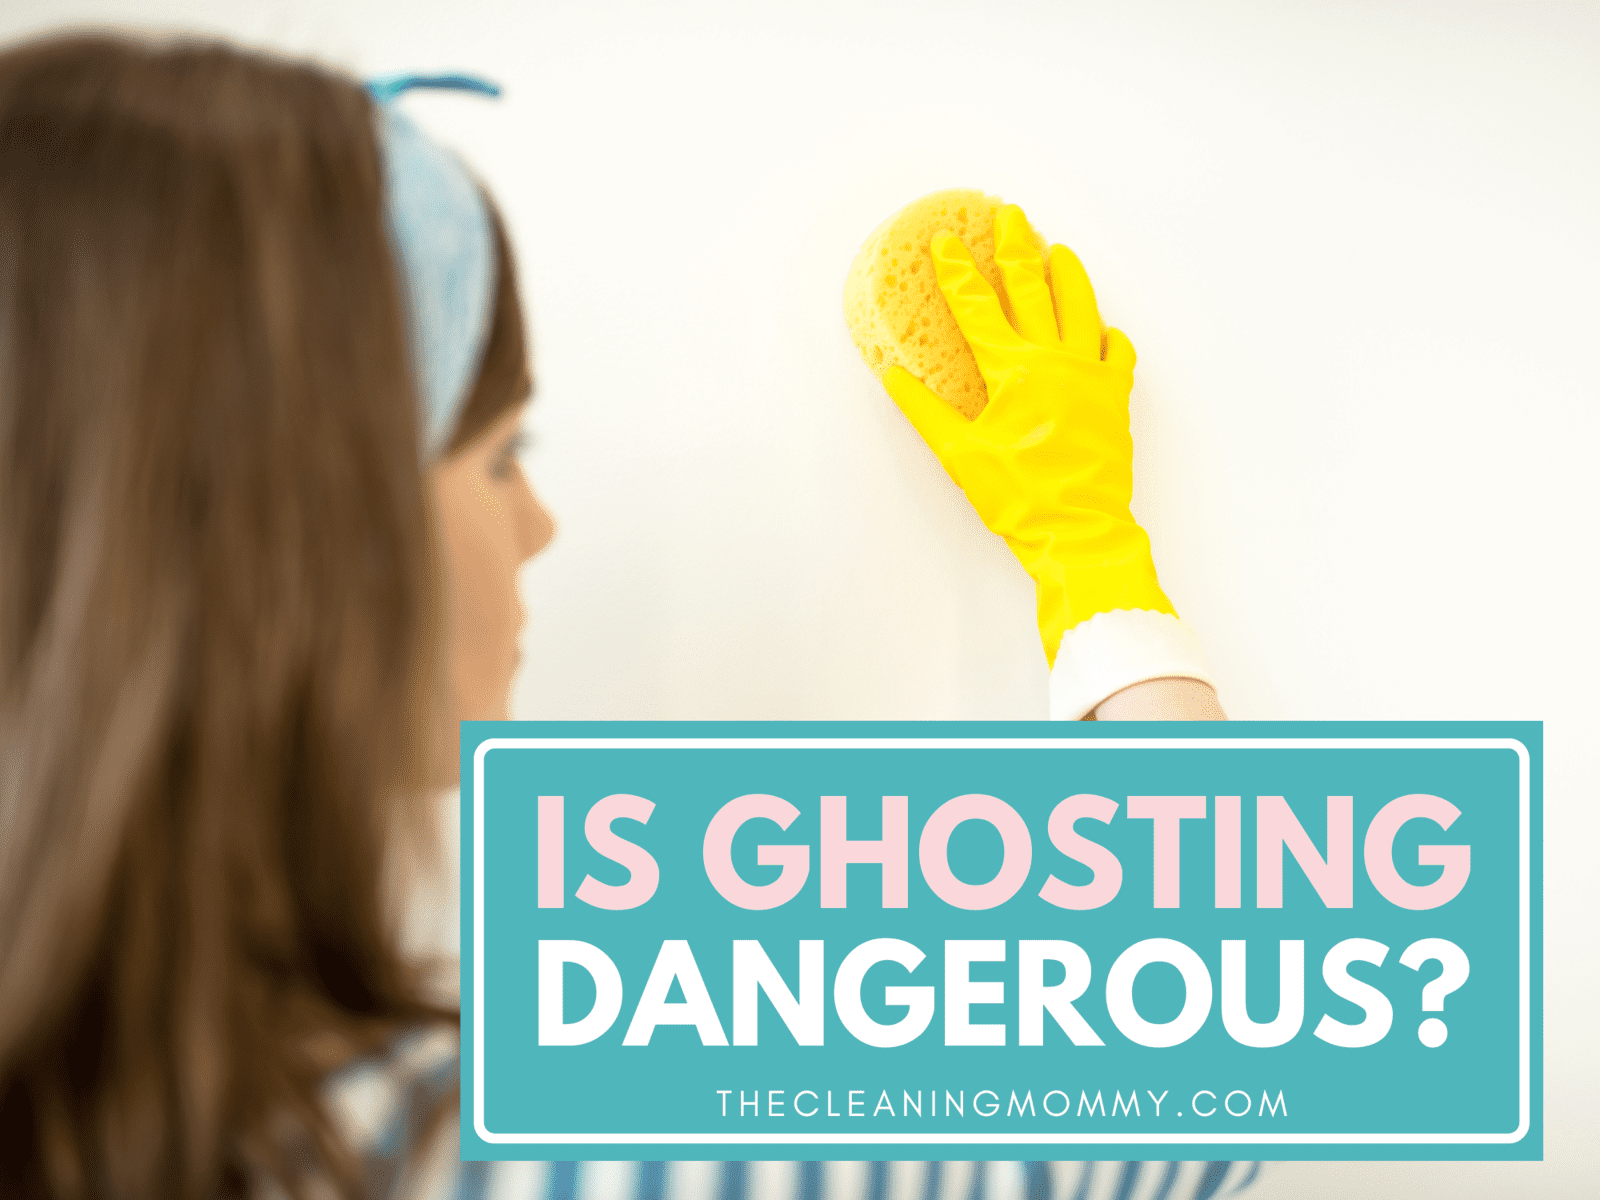 removing ghosting from walls